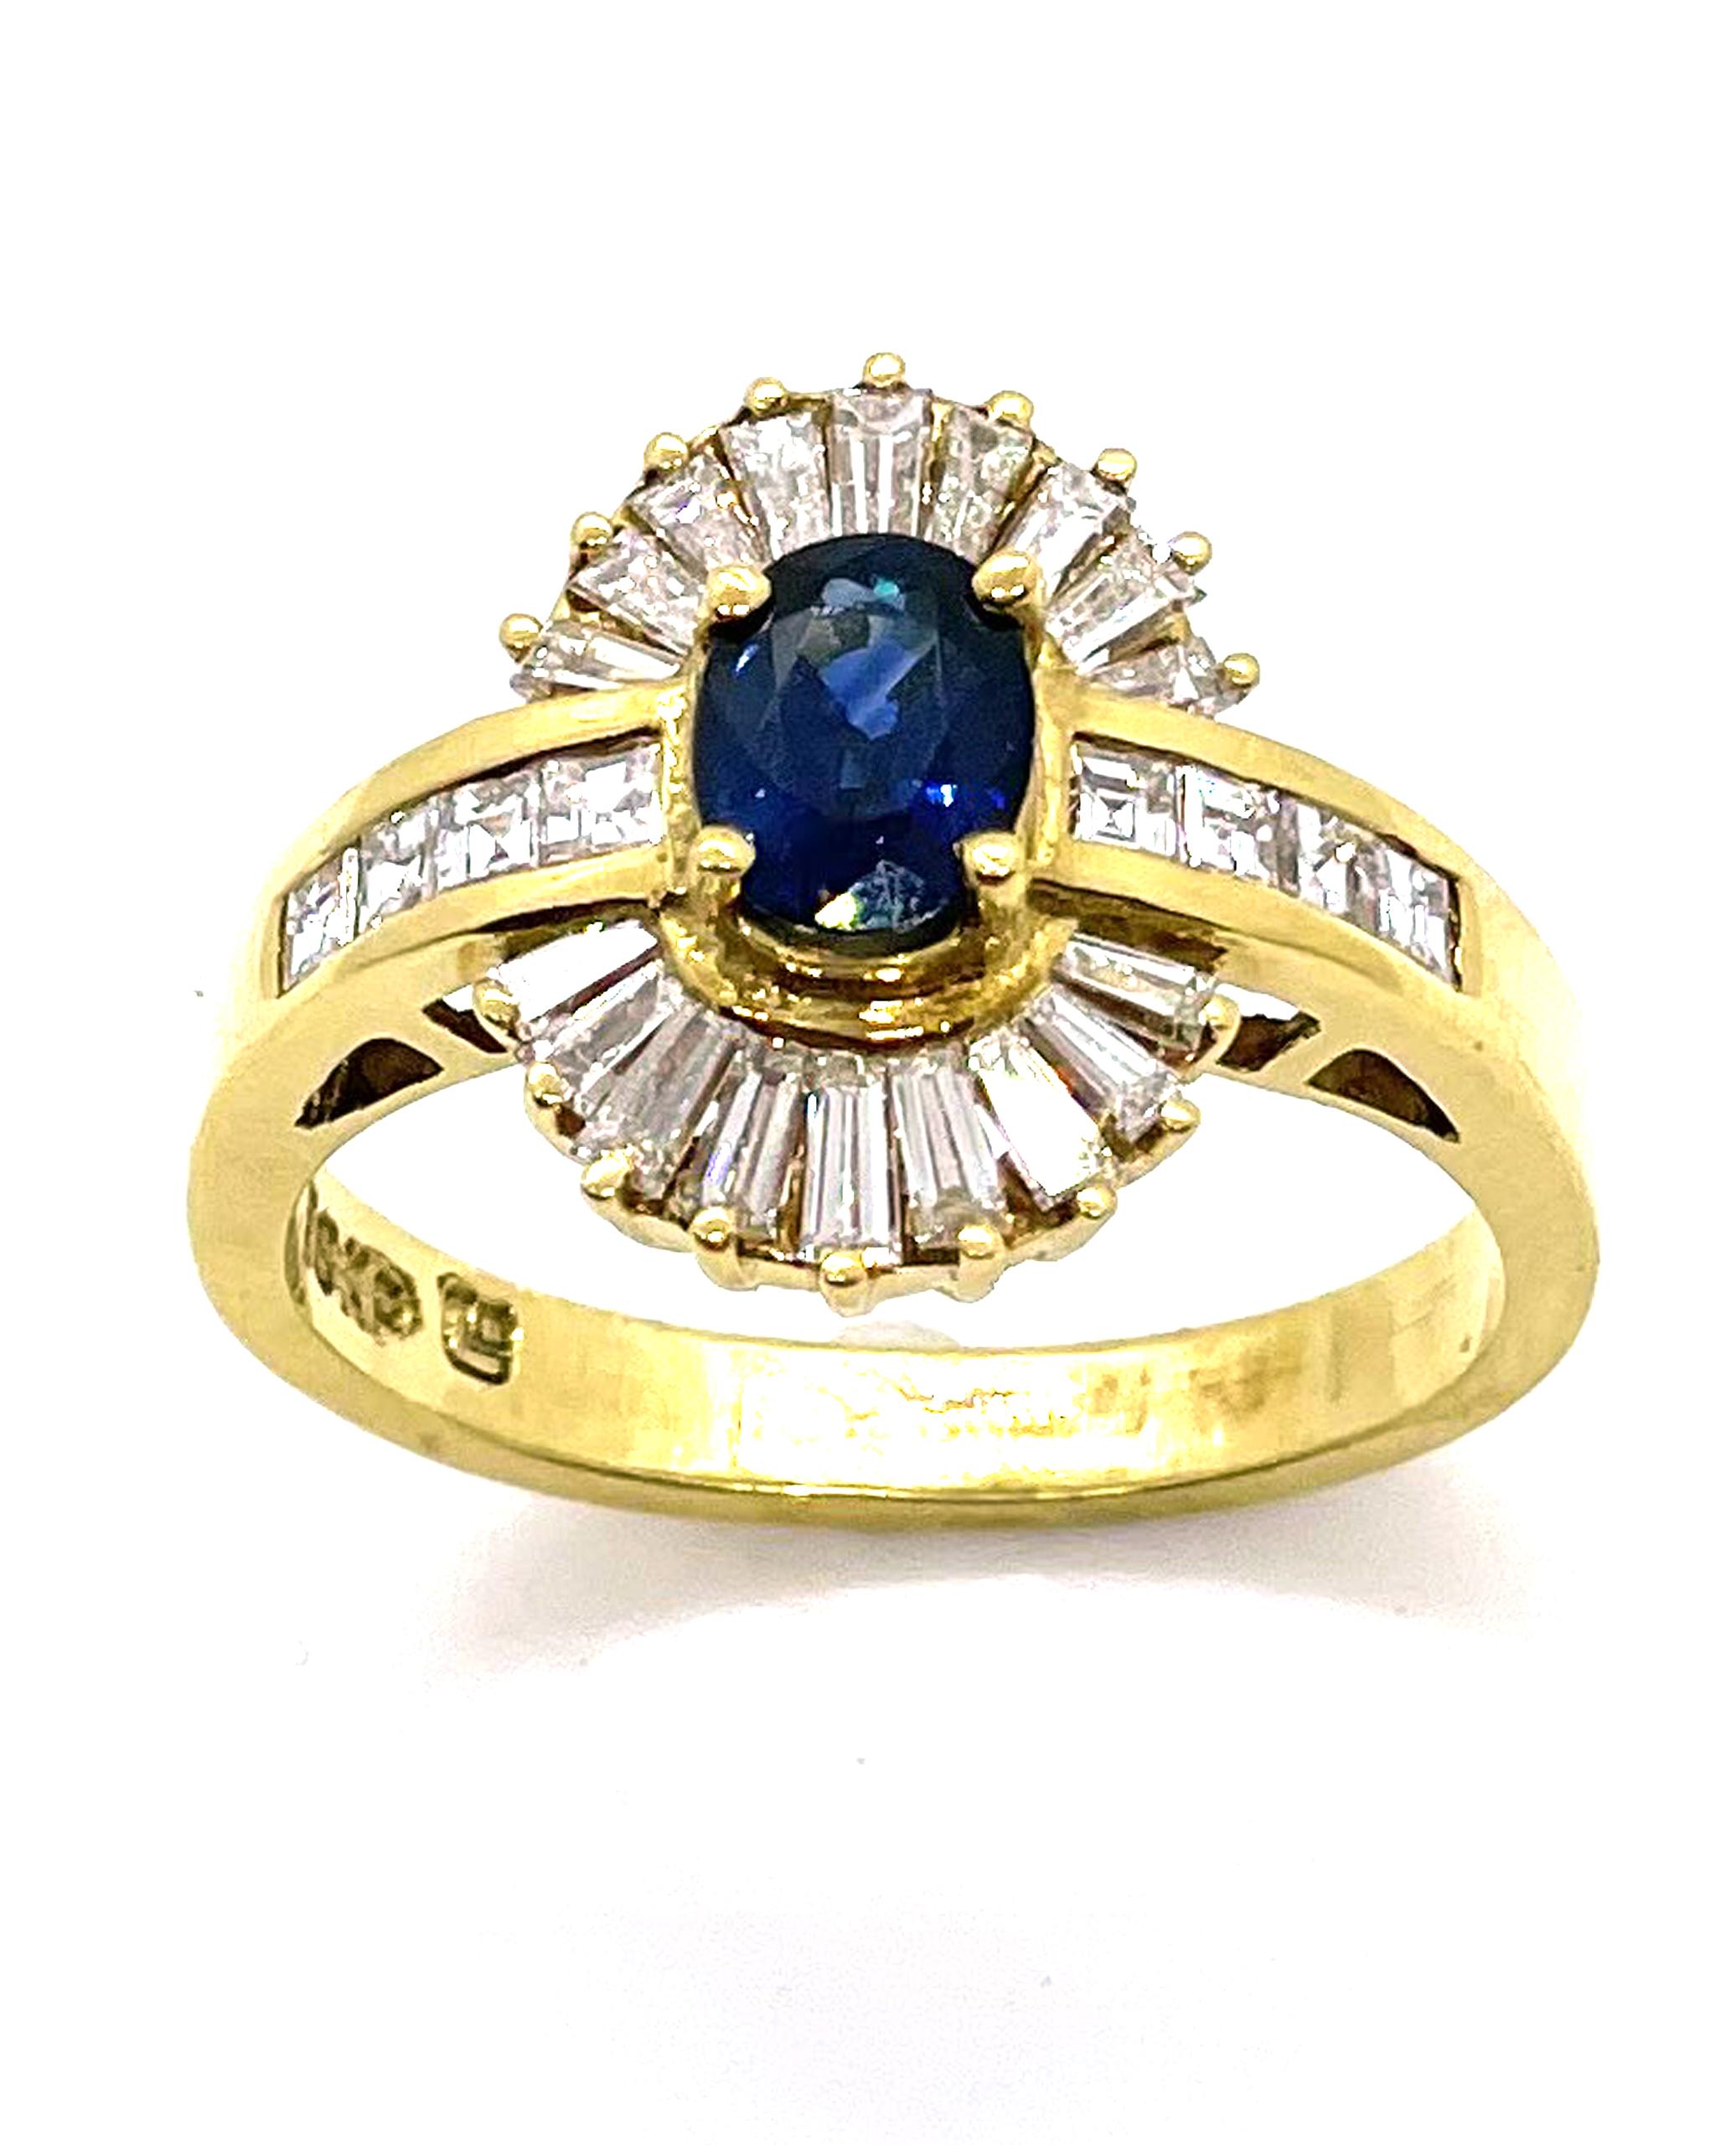 Vintage 18K yellow gold ring with one oval sapphire 0.77 carats and 8 asscher cut diamonds and 18 baguette diamonds totaling 1.00 carats. (F/G color, VS clarity)

- Created circa 1985
- Finger size 6.5